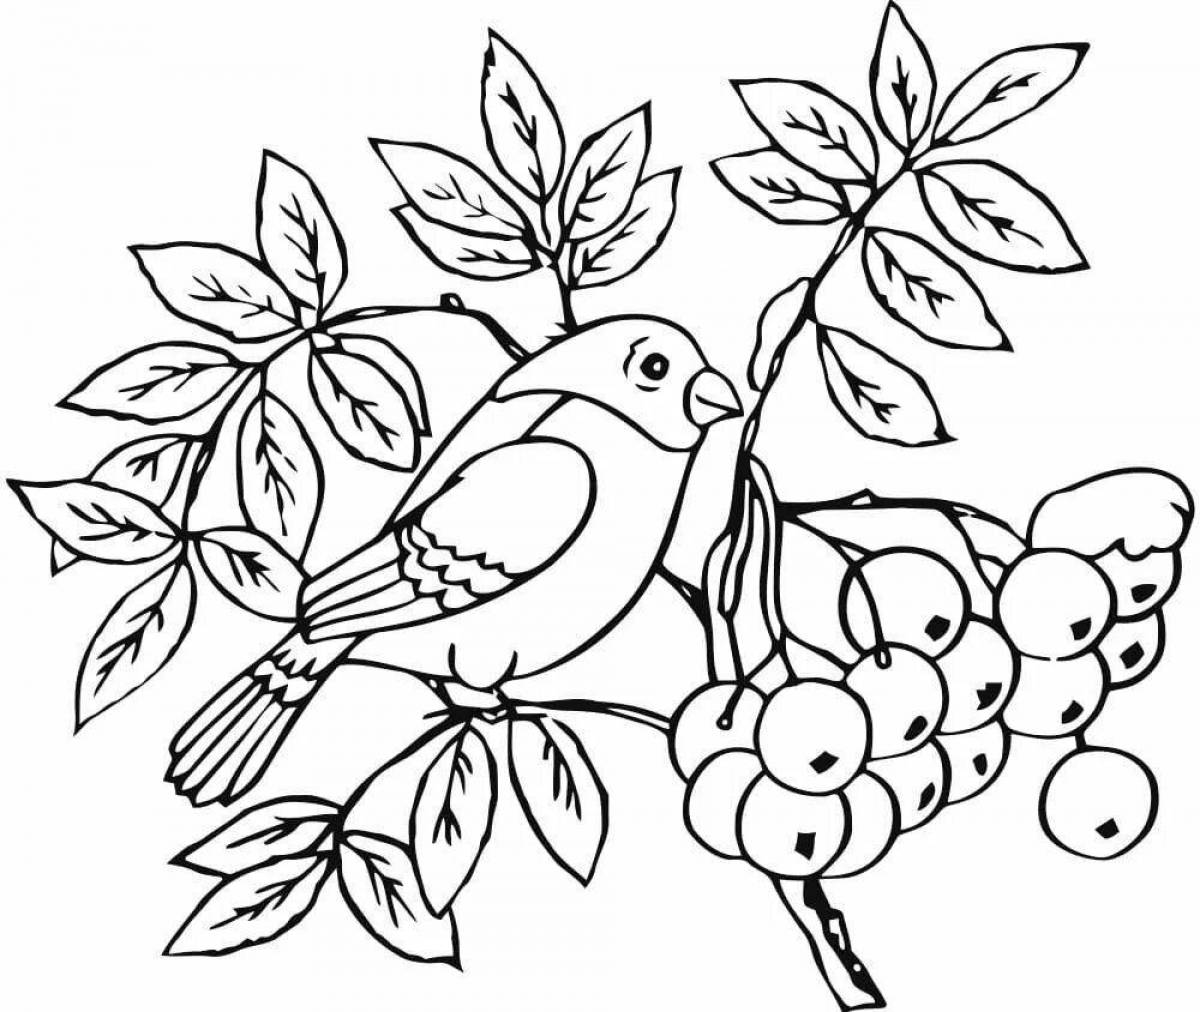 Radiant coloring page birds on a branch in winter